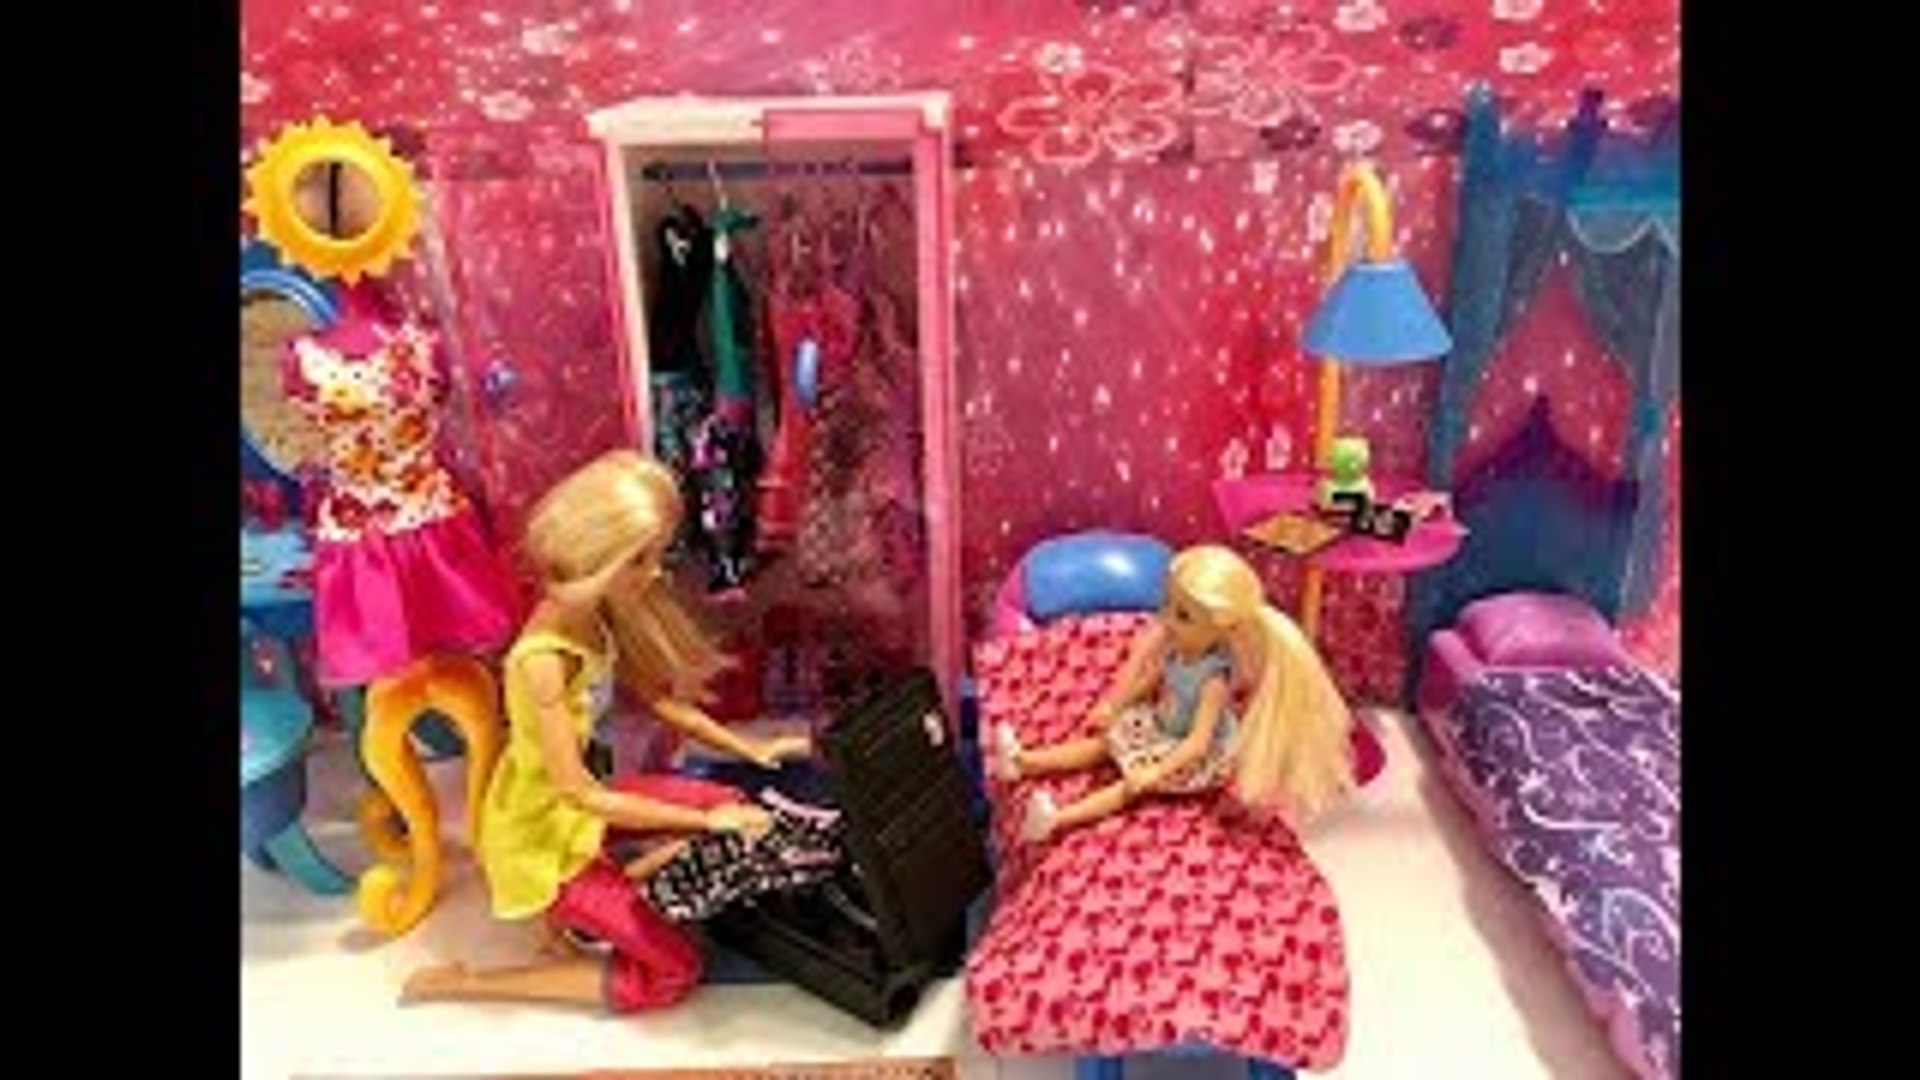 Barbie Bedroom Morning Routine! Chelsea at the PARK! - Dailymotion Video